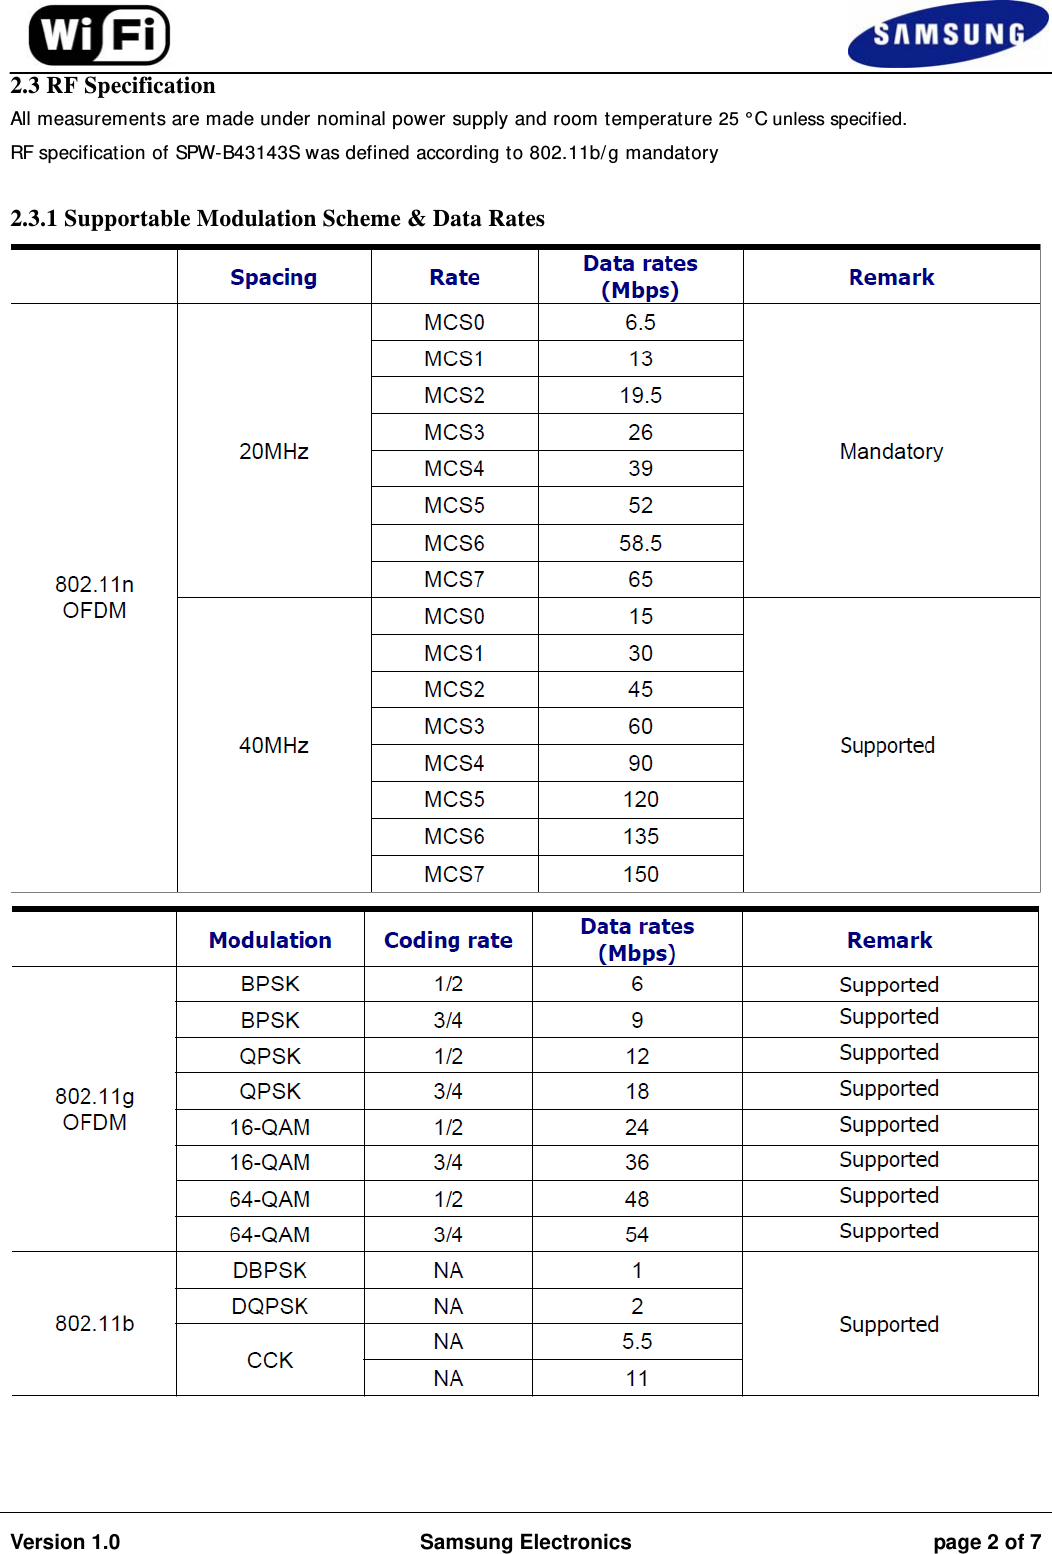                                                                                                                                         Version 1.0  Samsung Electronics  page 2 of 7   2.3 RF Specification All measurements are made under nominal power supply and room temperature 25 ° C unless specified. RF specification of SPW-B43143S was defined according to 802.11b/g mandatory  2.3.1 Supportable Modulation Scheme &amp; Data Rates      